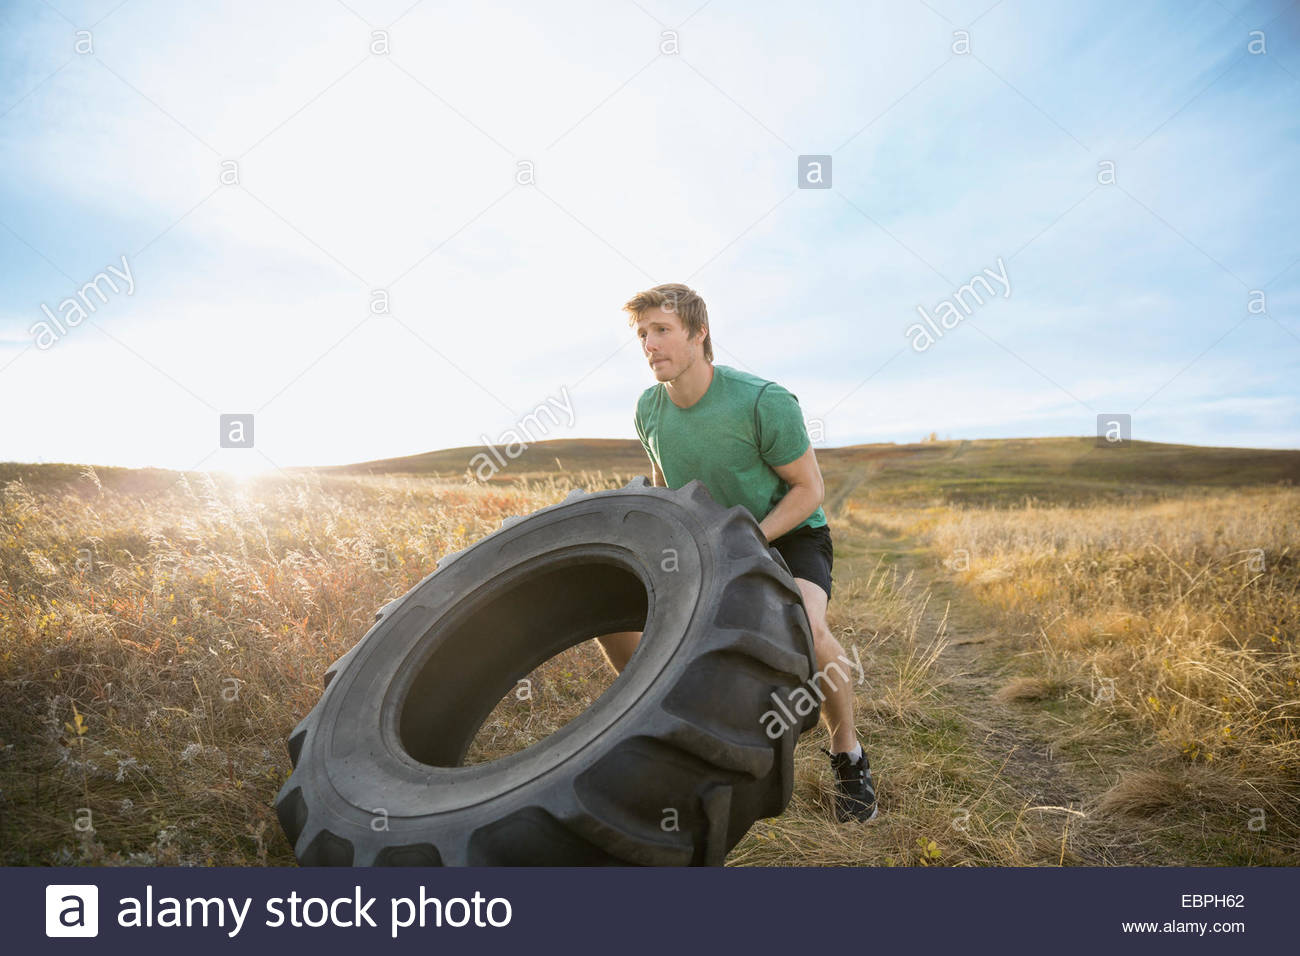 Man flipping crossfit tire in sunny rural field Stock Photo